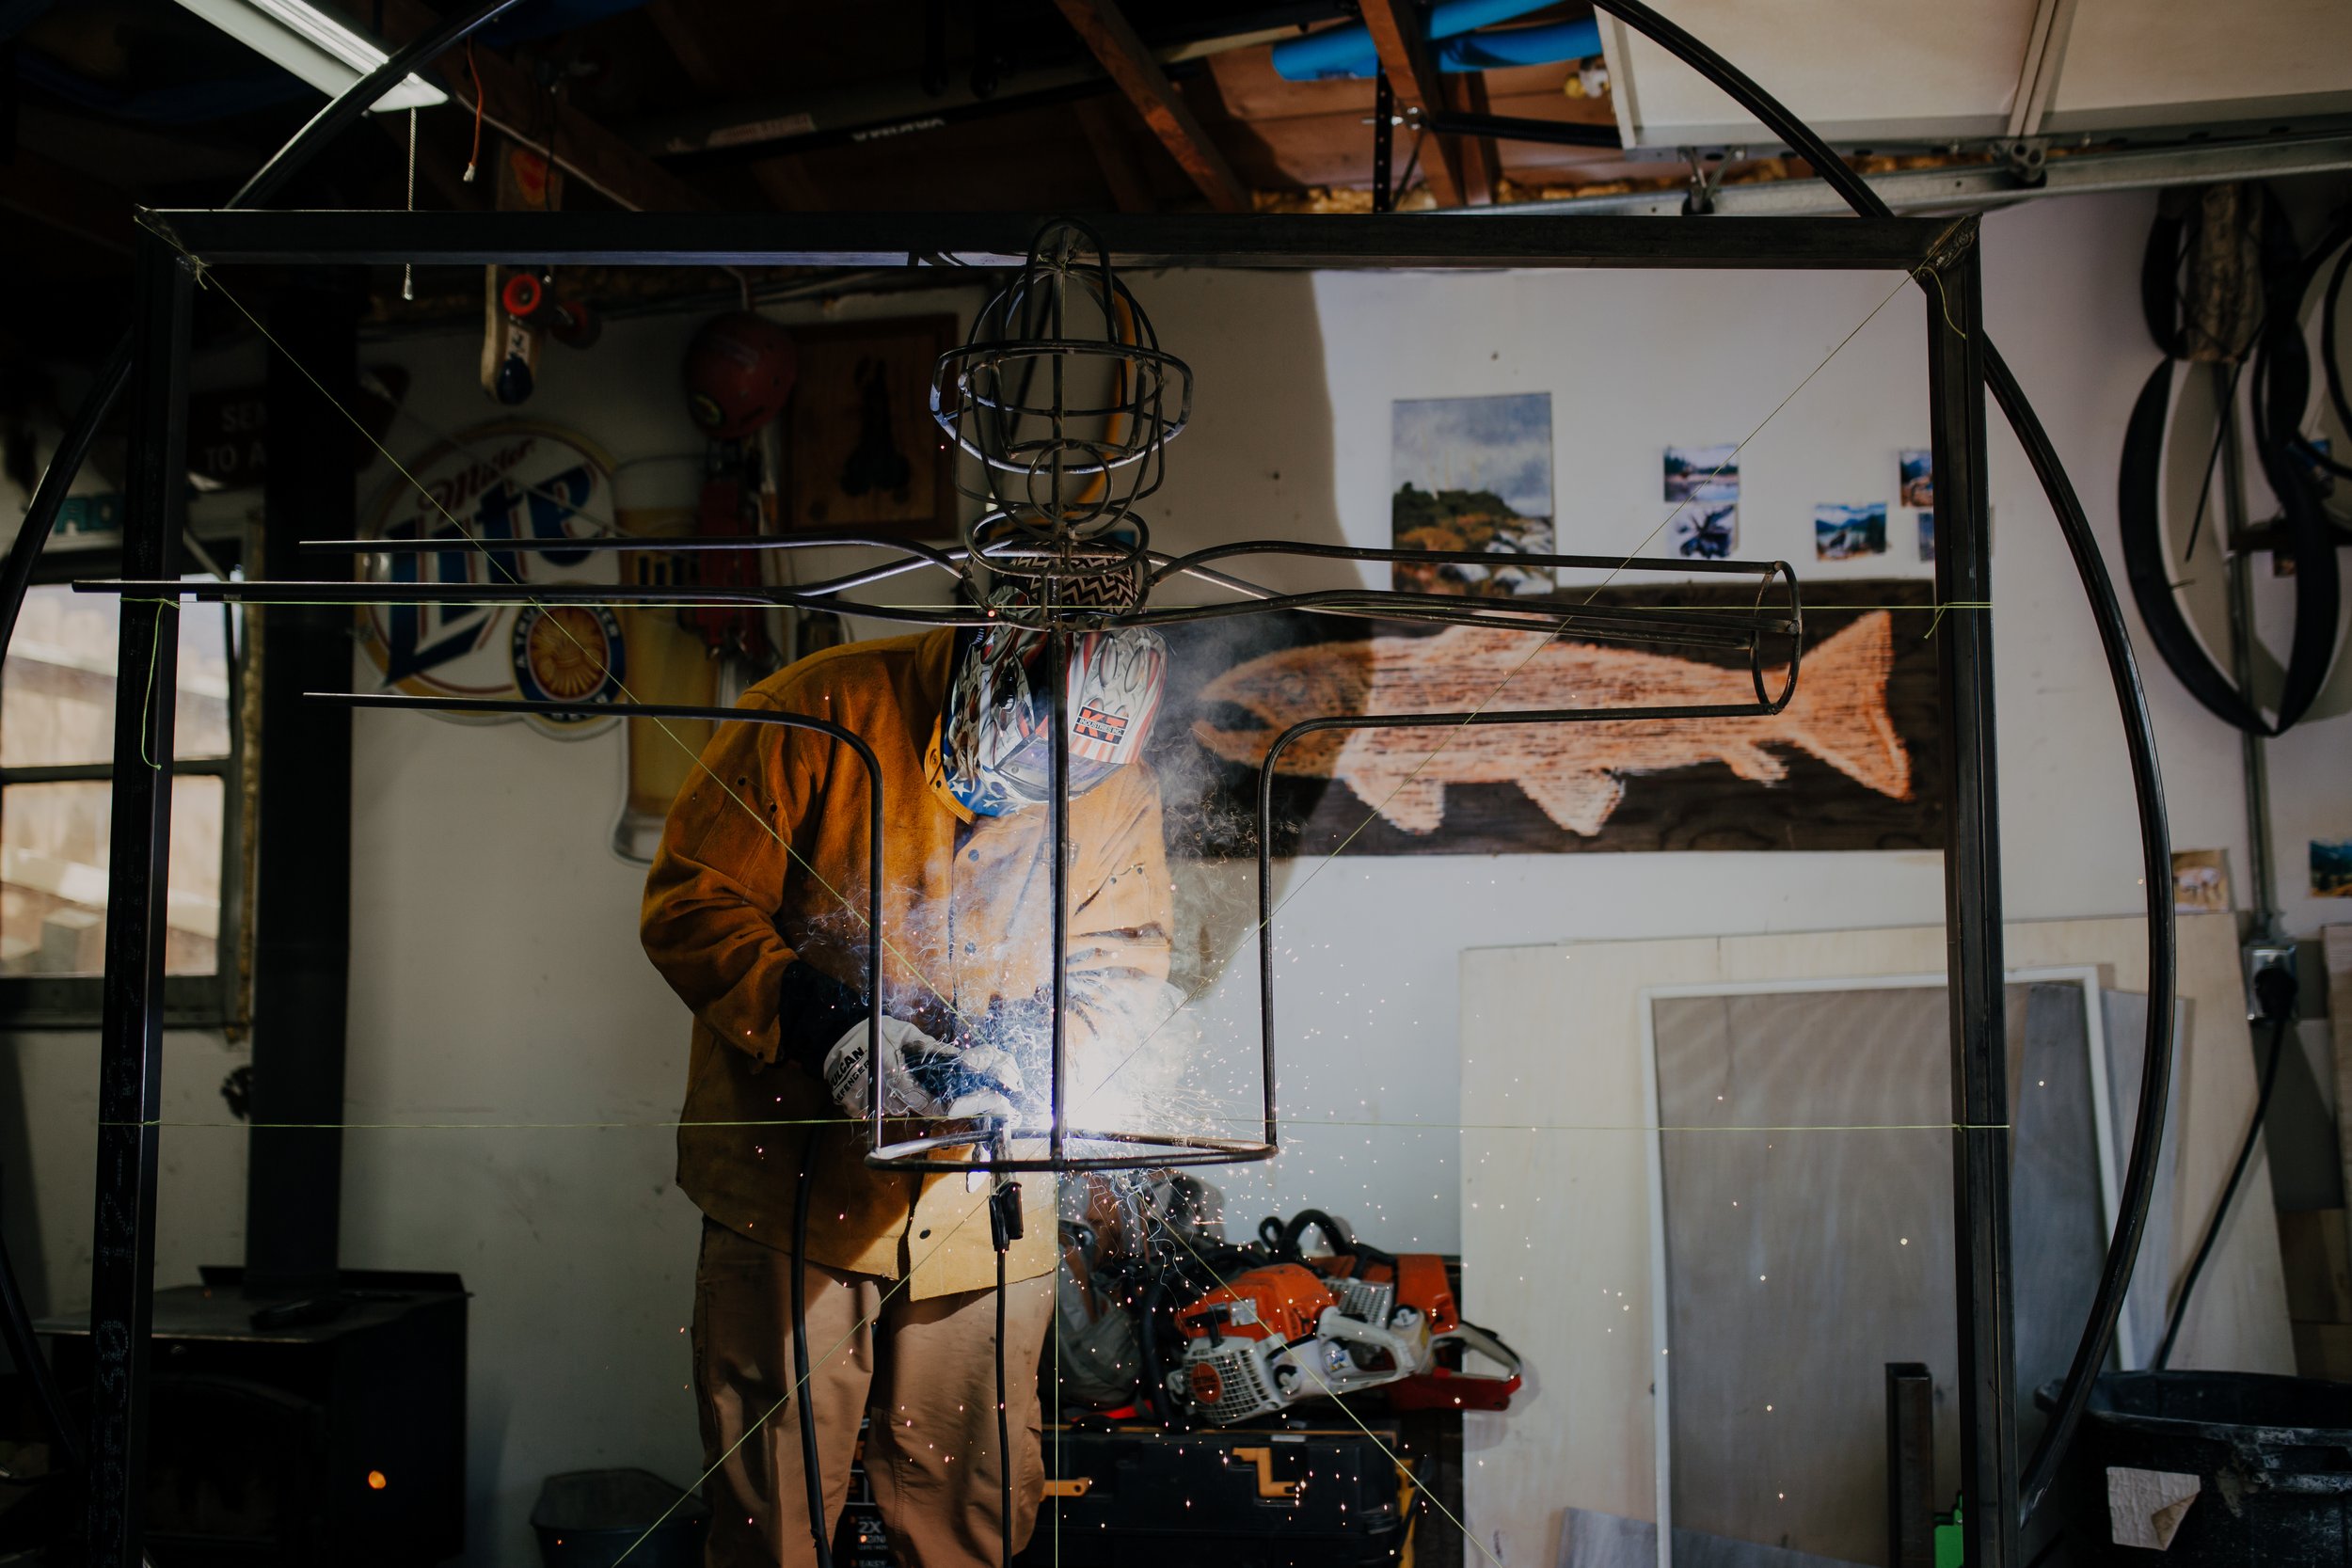  Artist Brandon Russell creating the work in his studio. Image by Sydney Edwards. 